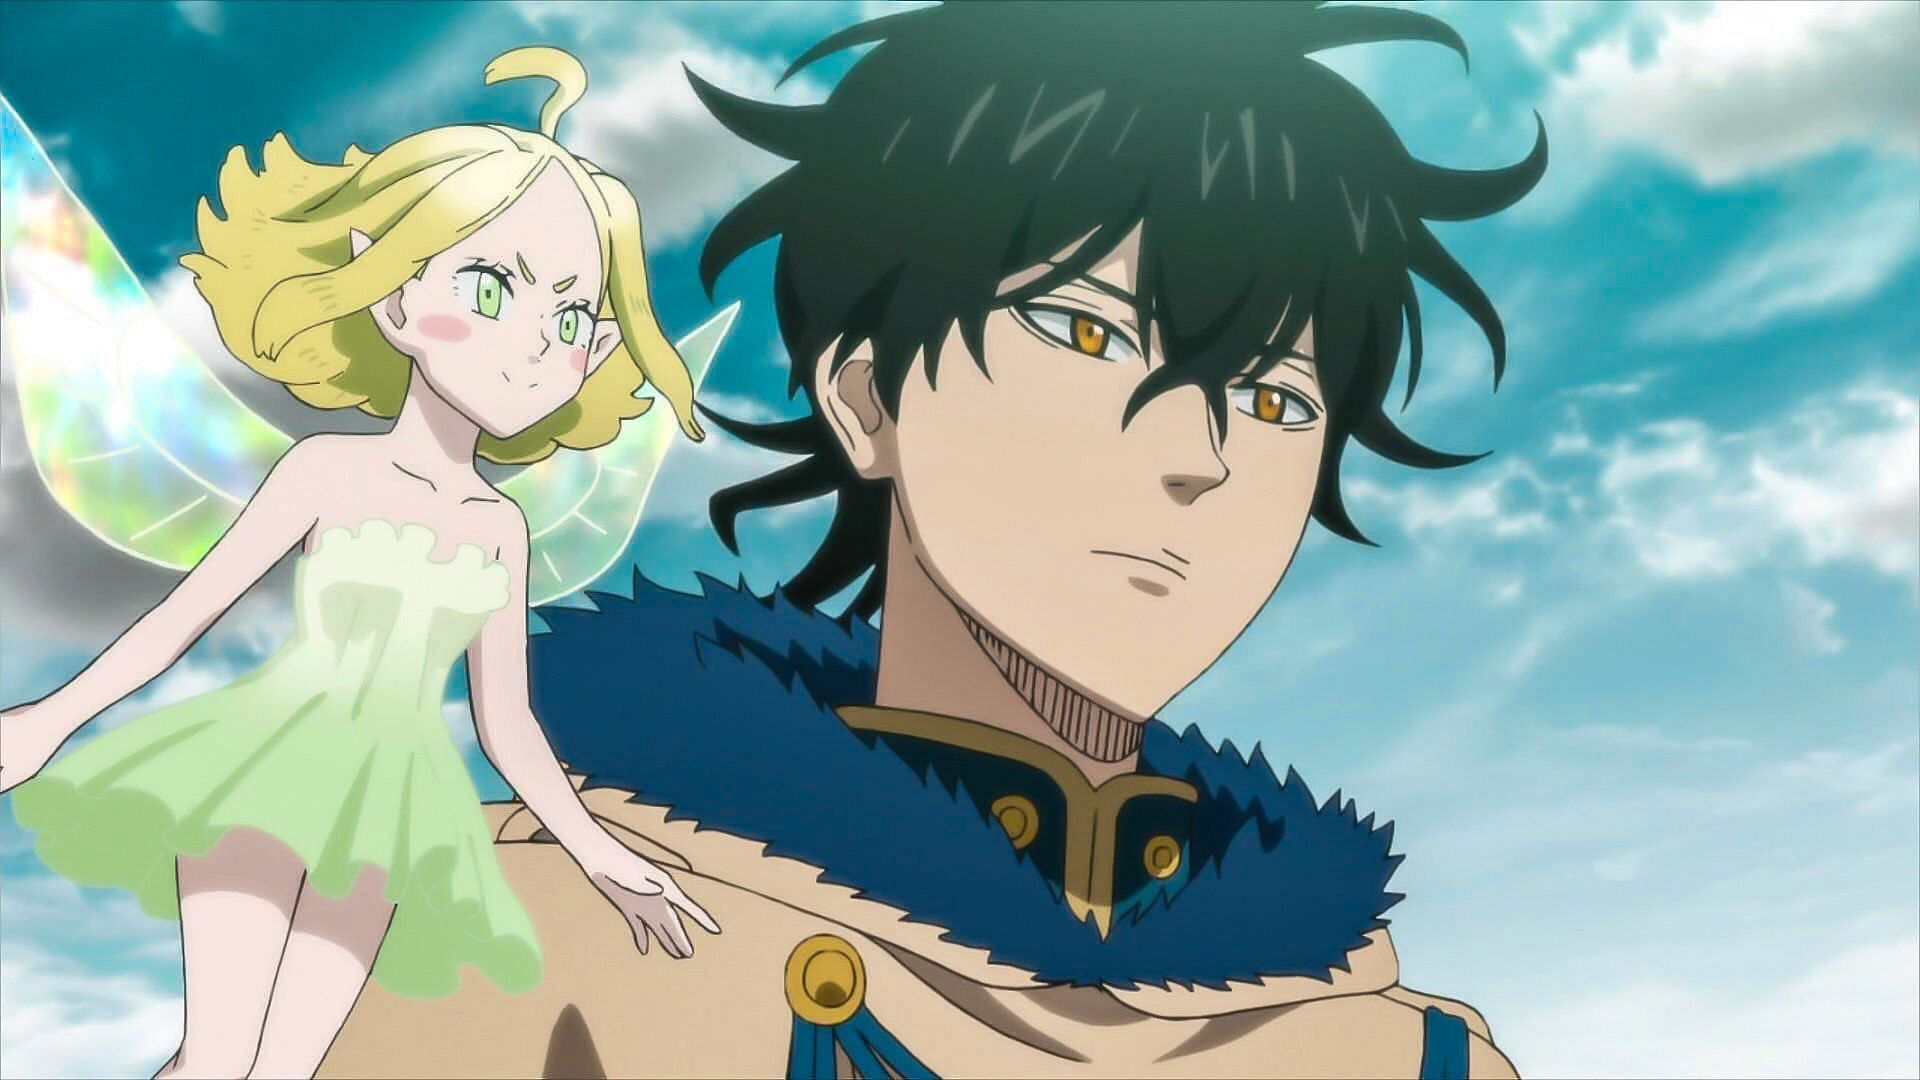 Yuno and his Wind Spirit: Sylph as seen in the Black Clover anime